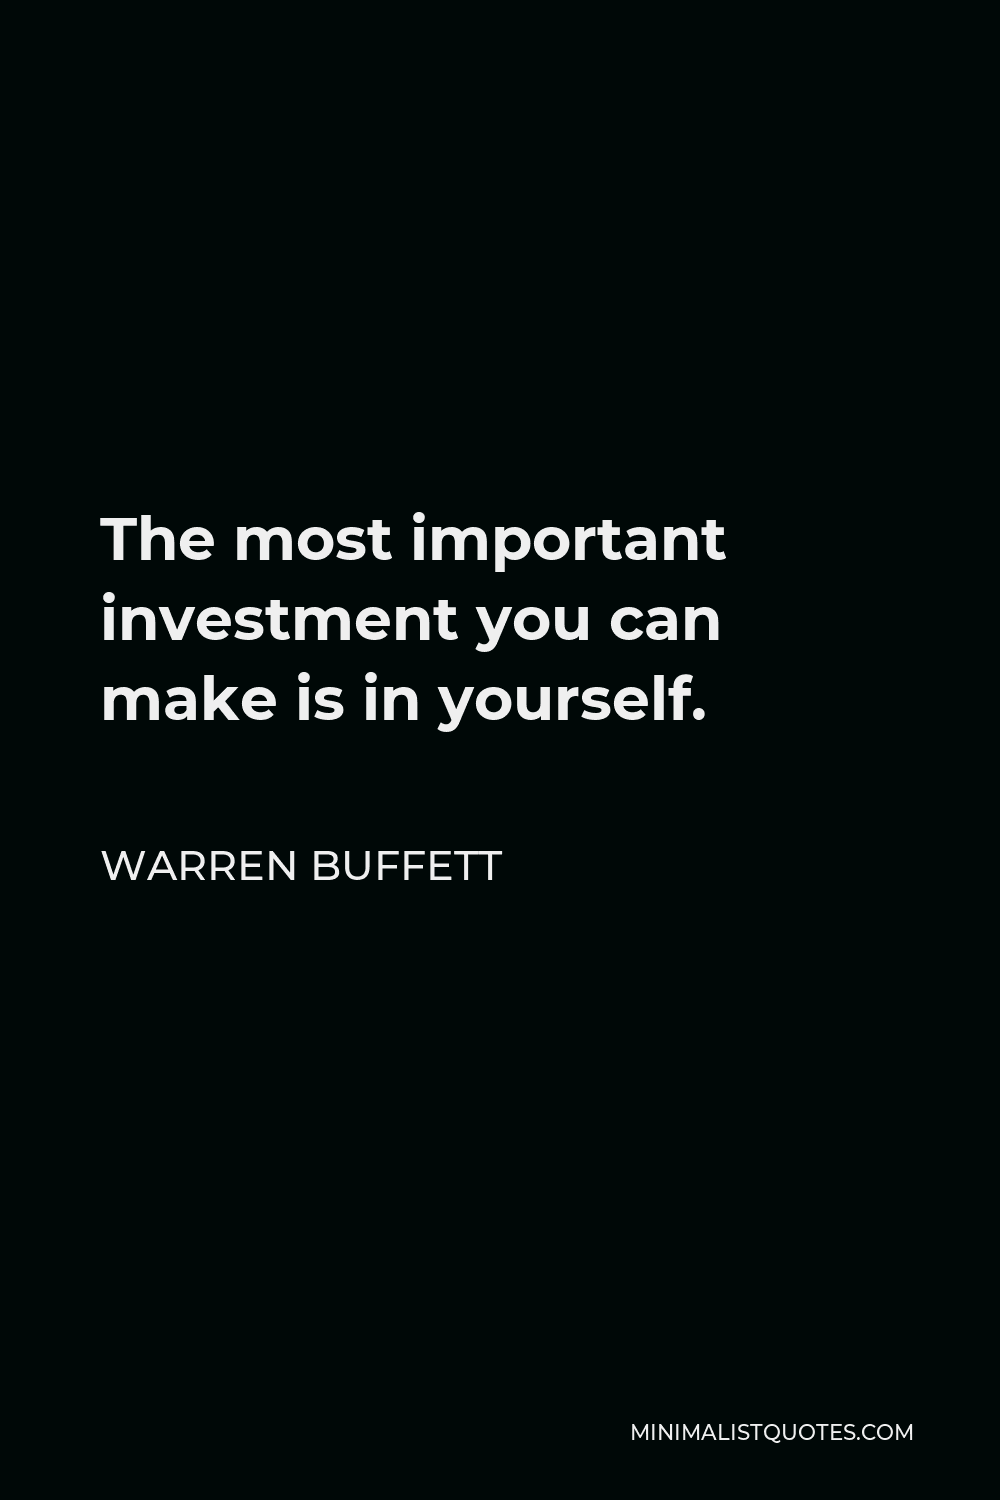 Warren Buffett Quote: The most important investment you can make is in yourself.